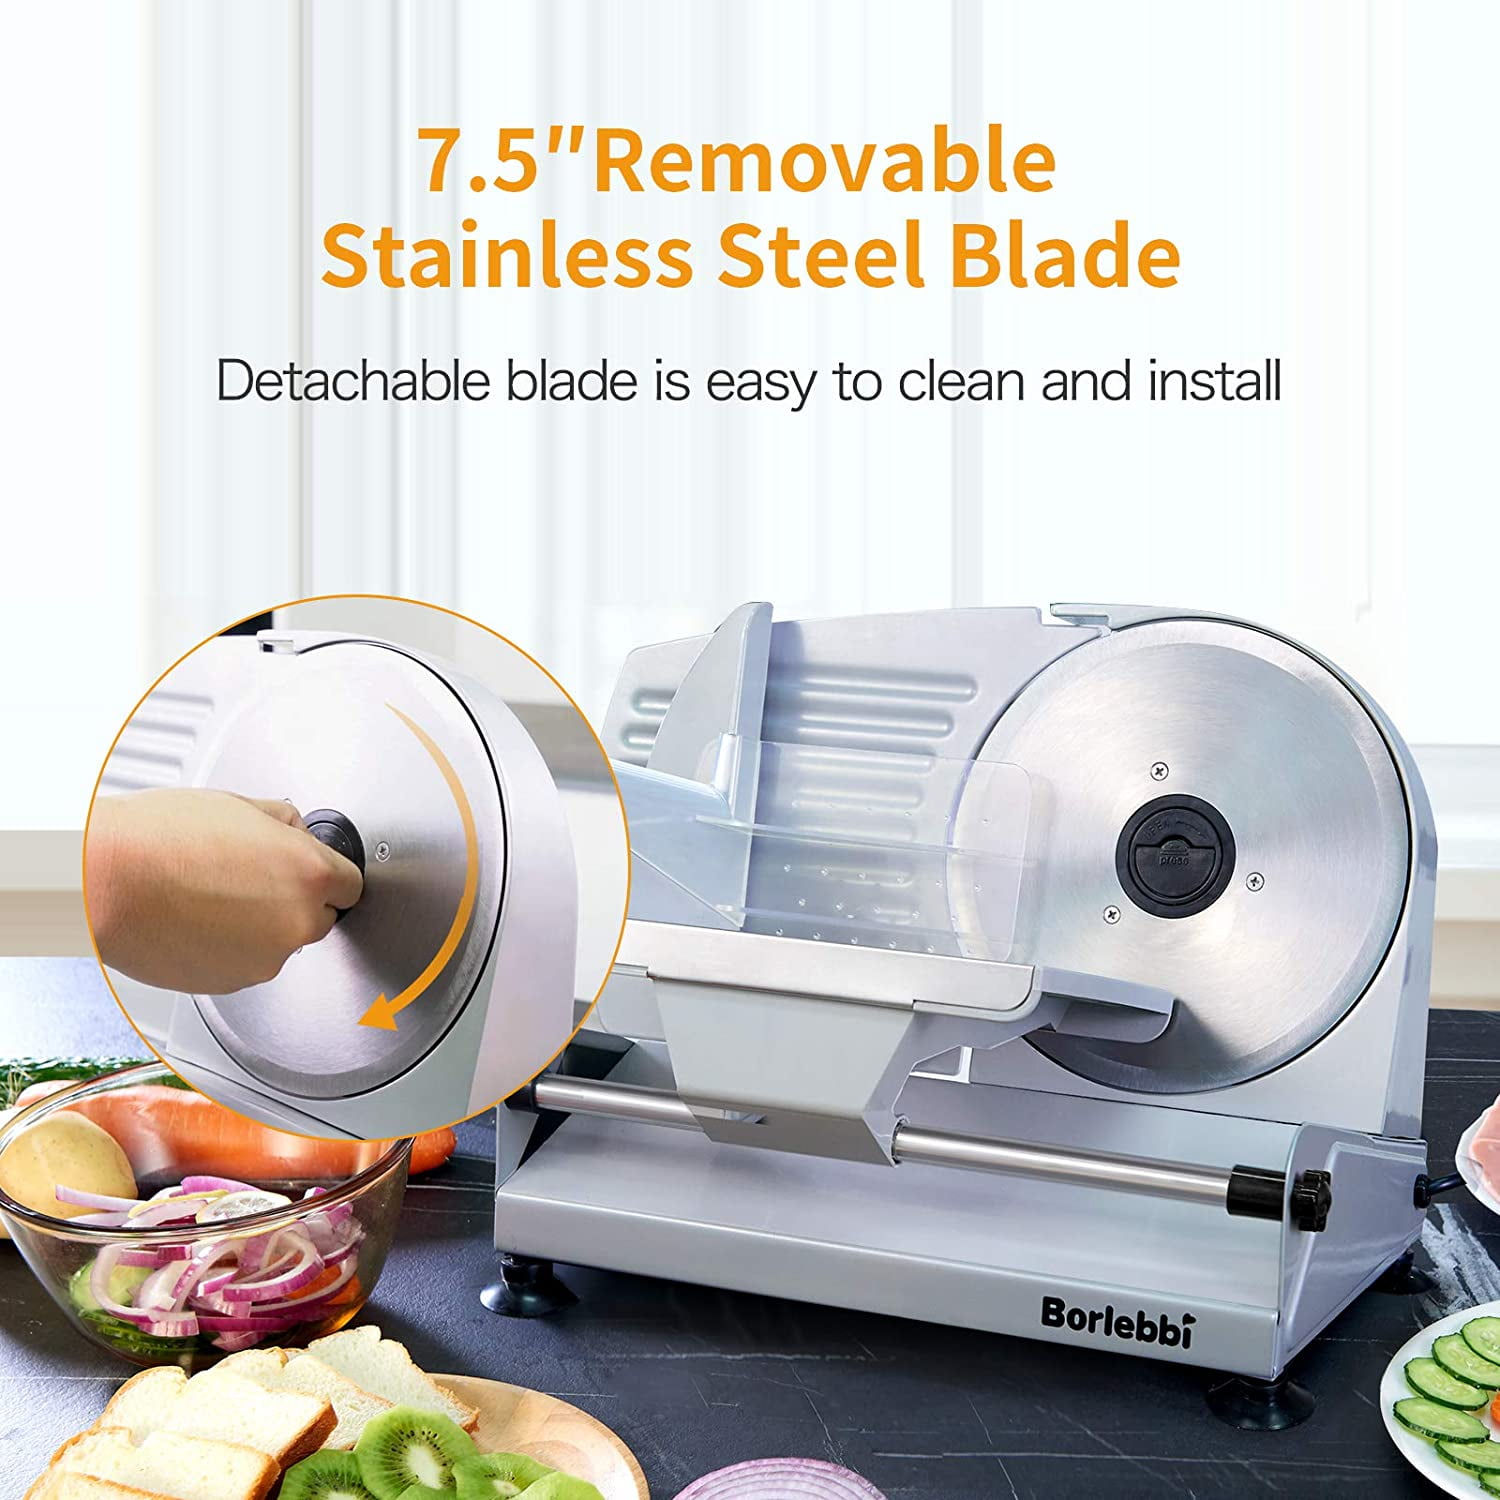 Meat Slicer, Anescra 200W Electric Deli Food Slicer with Two Removable  7.5'' Stainless Steel Blades and Food Carriage, 0-15mm Adjustable Thickness